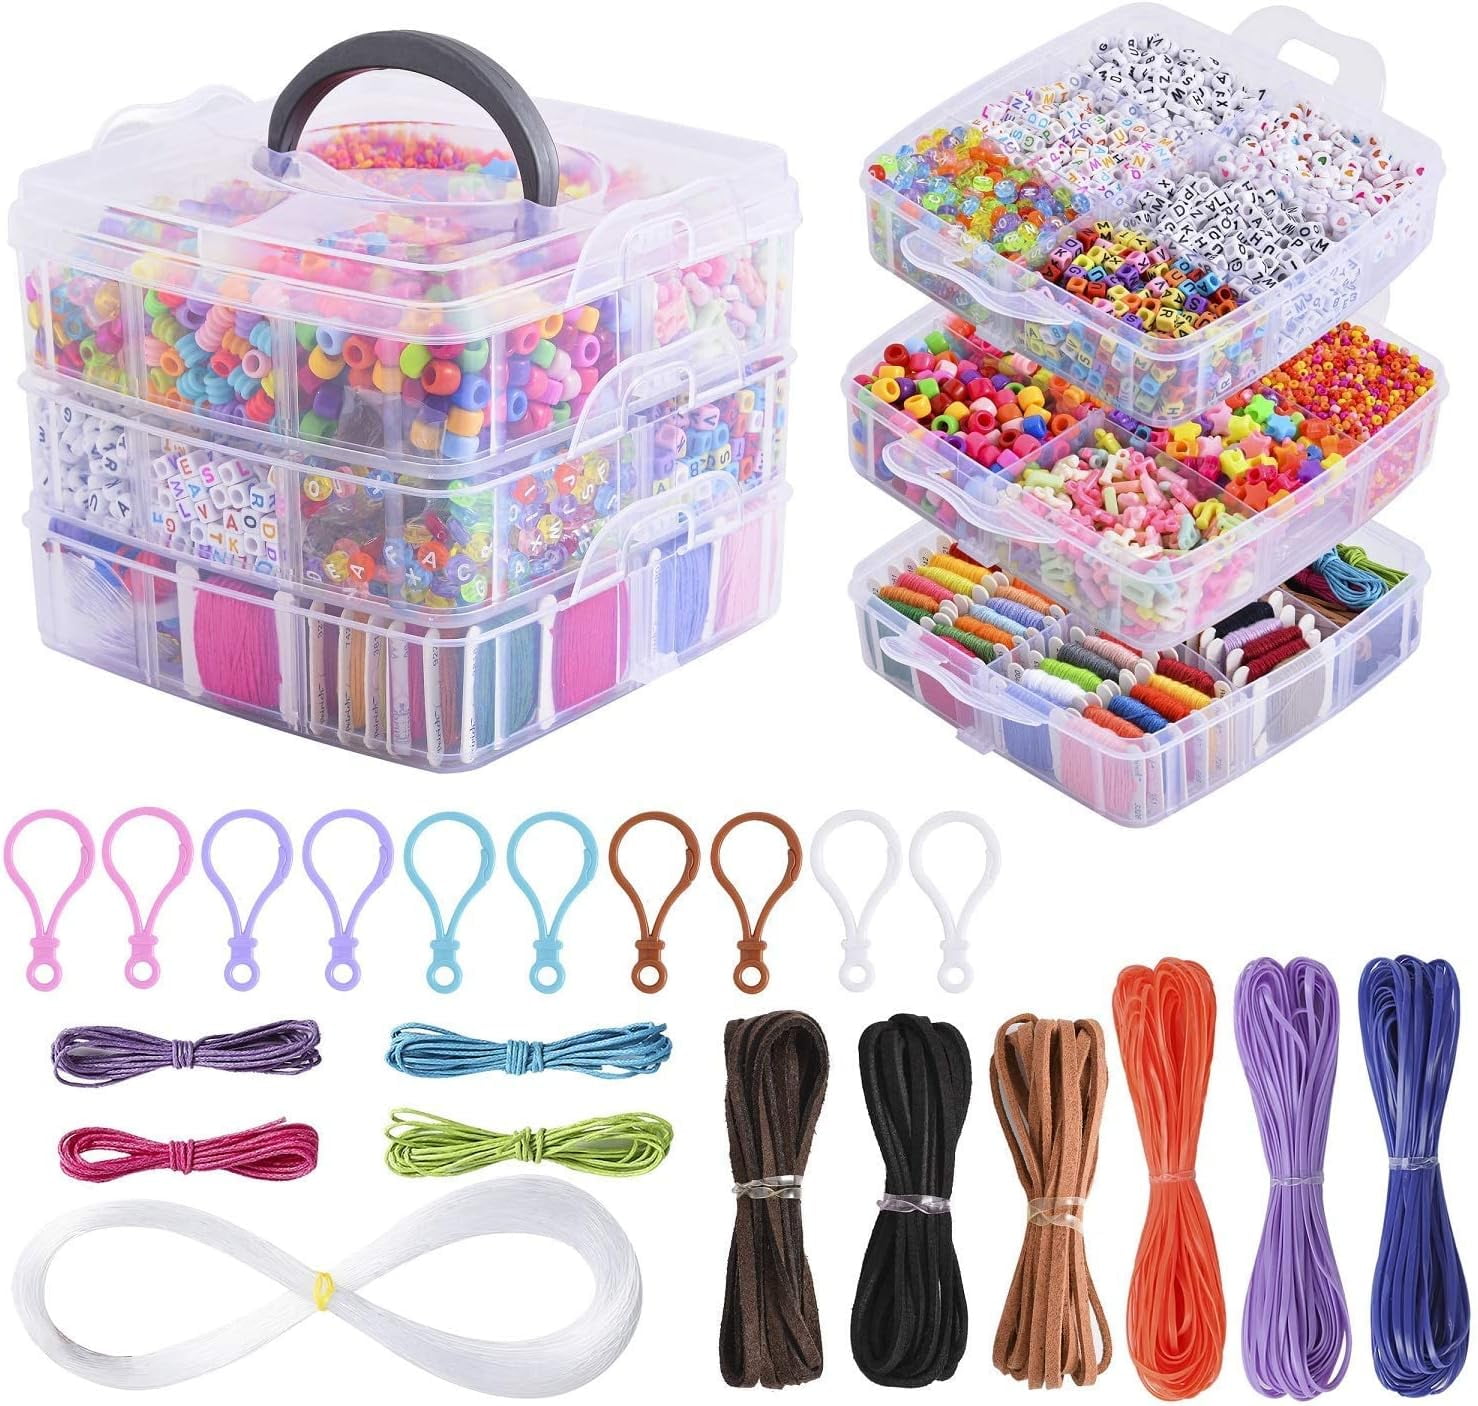 Peirich 201 Pack Embroidery Floss Kit, Includes Embroidery Threads 3-Tier  Organizer Box Embroidery Kits for Friendship Bracelets Cross stitch DIY